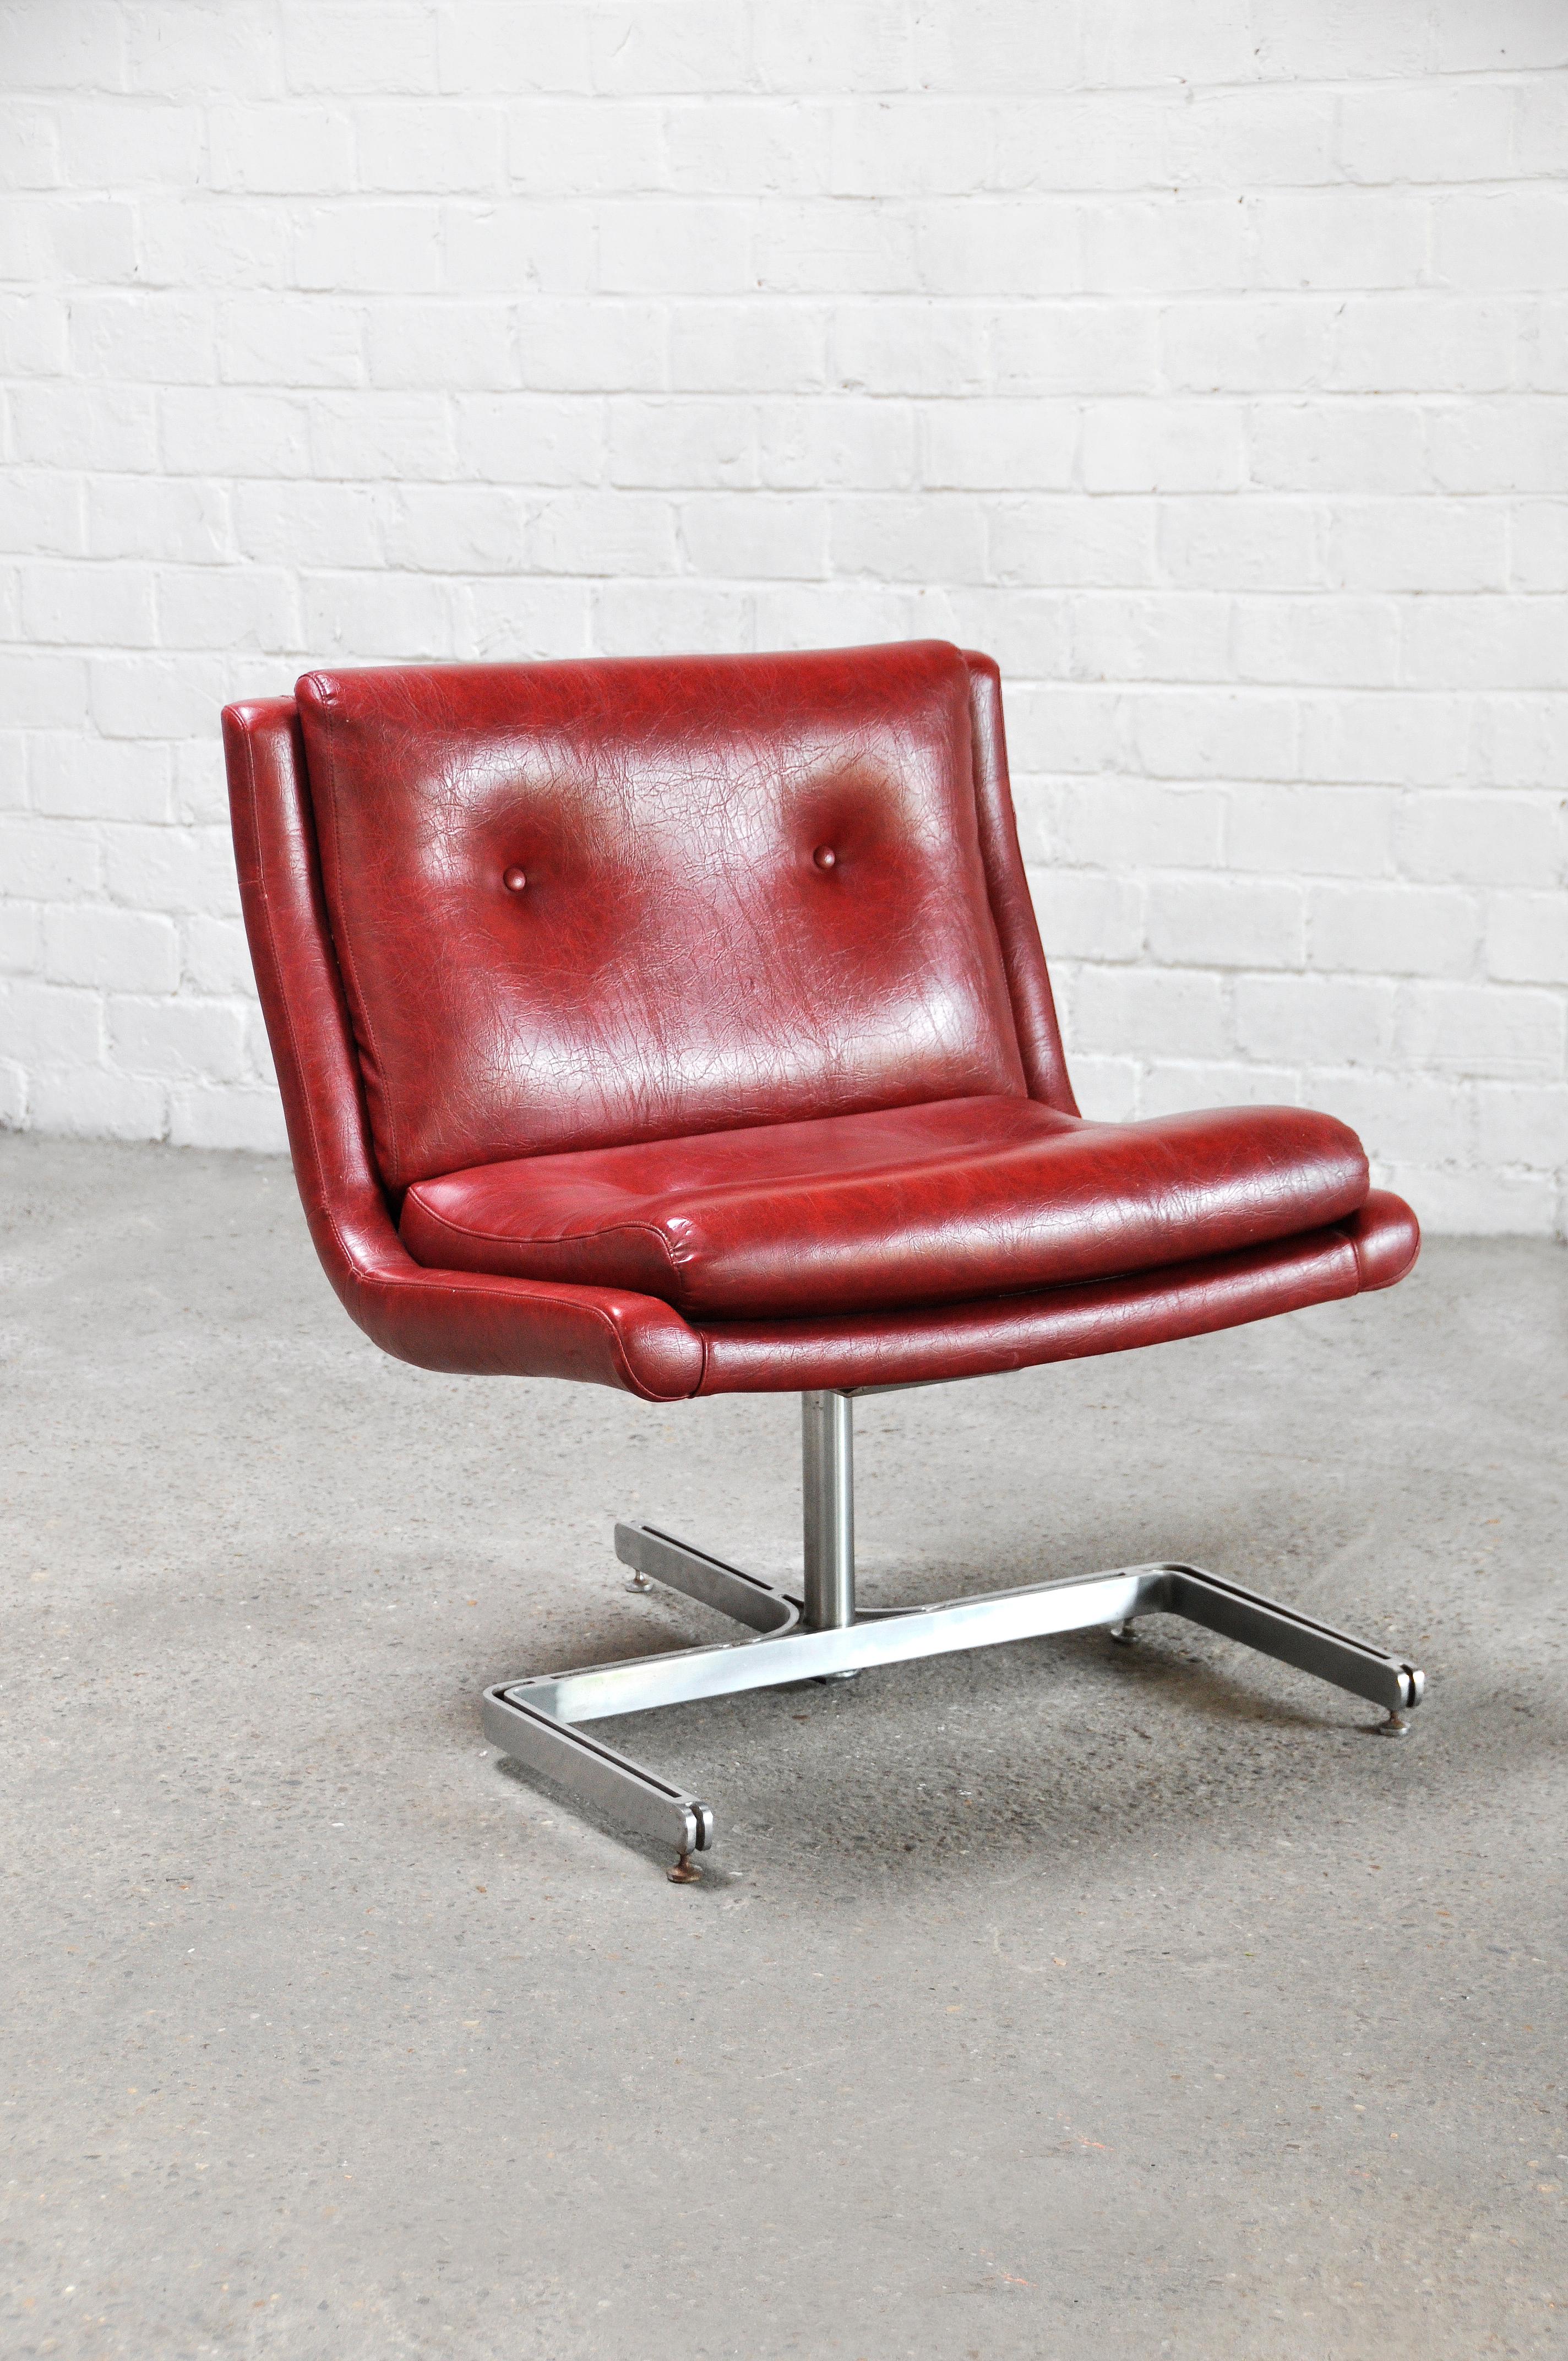 Late 20th Century French Raphael Raffel Lounge Chair in Red Leather & Stainless Steel, 1970s